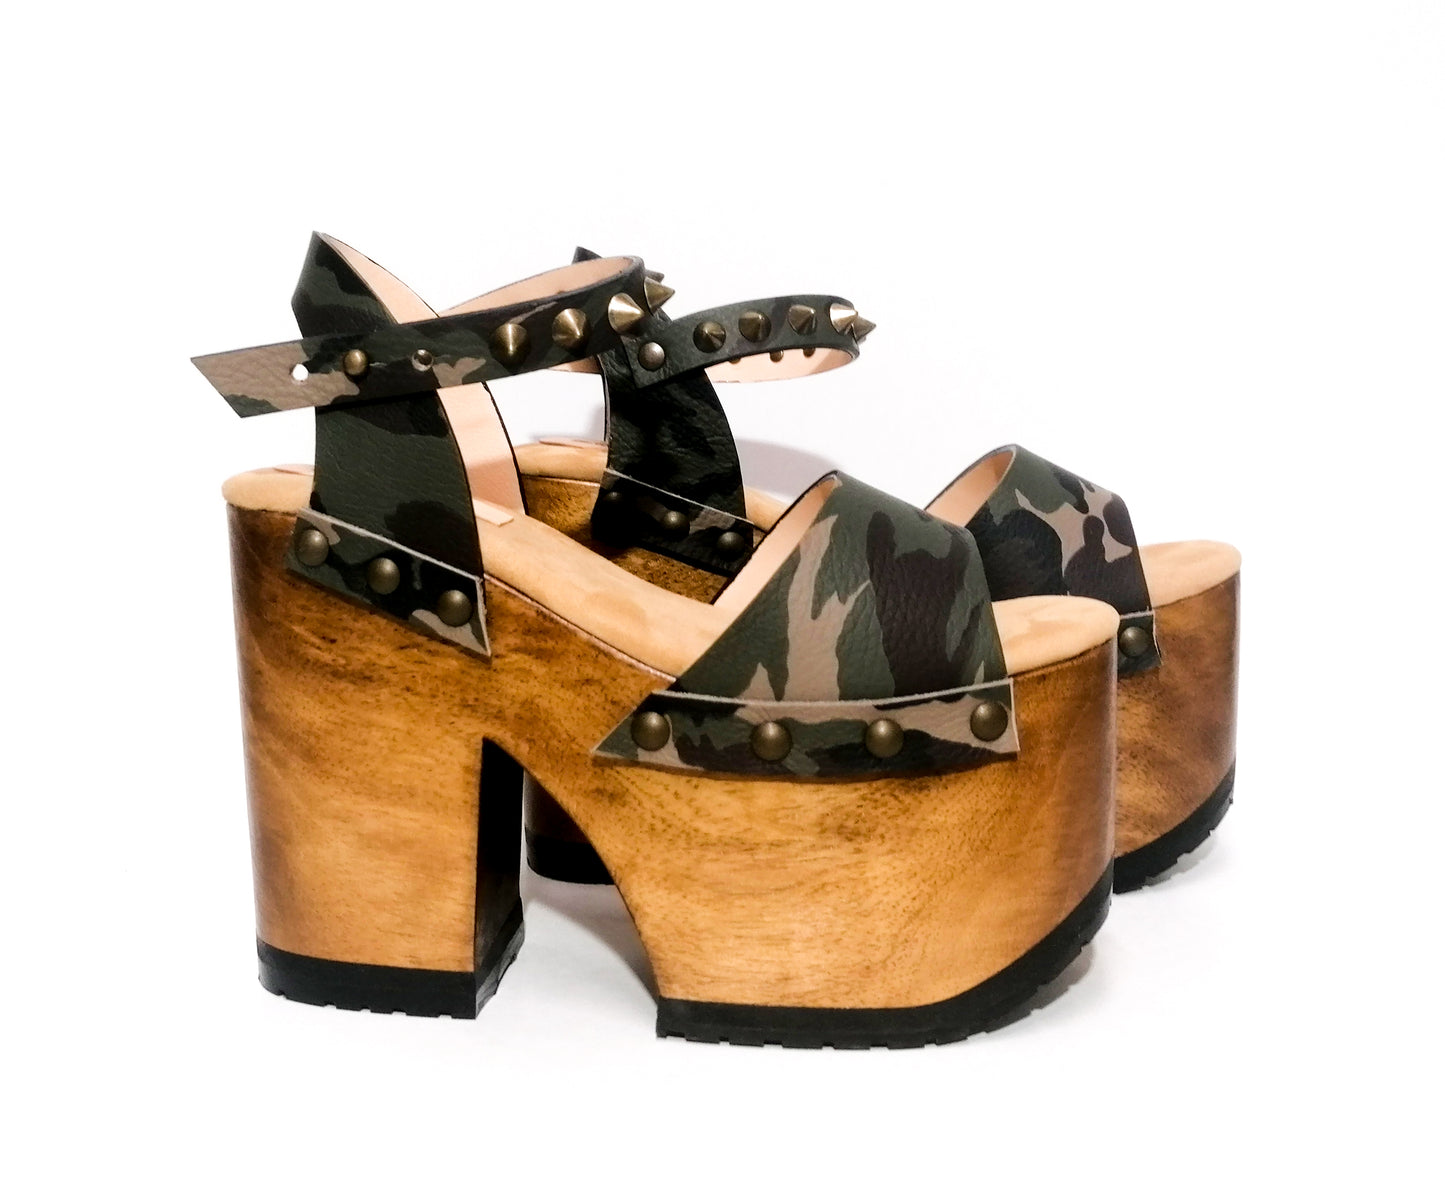 70's style platform clog sandal. Platform sandal handmade in military leather. Super high wooden heel military style. Sizes 34 to 47. High quality handmade leather shoes by sol Caleyo. Sustainable fashion.